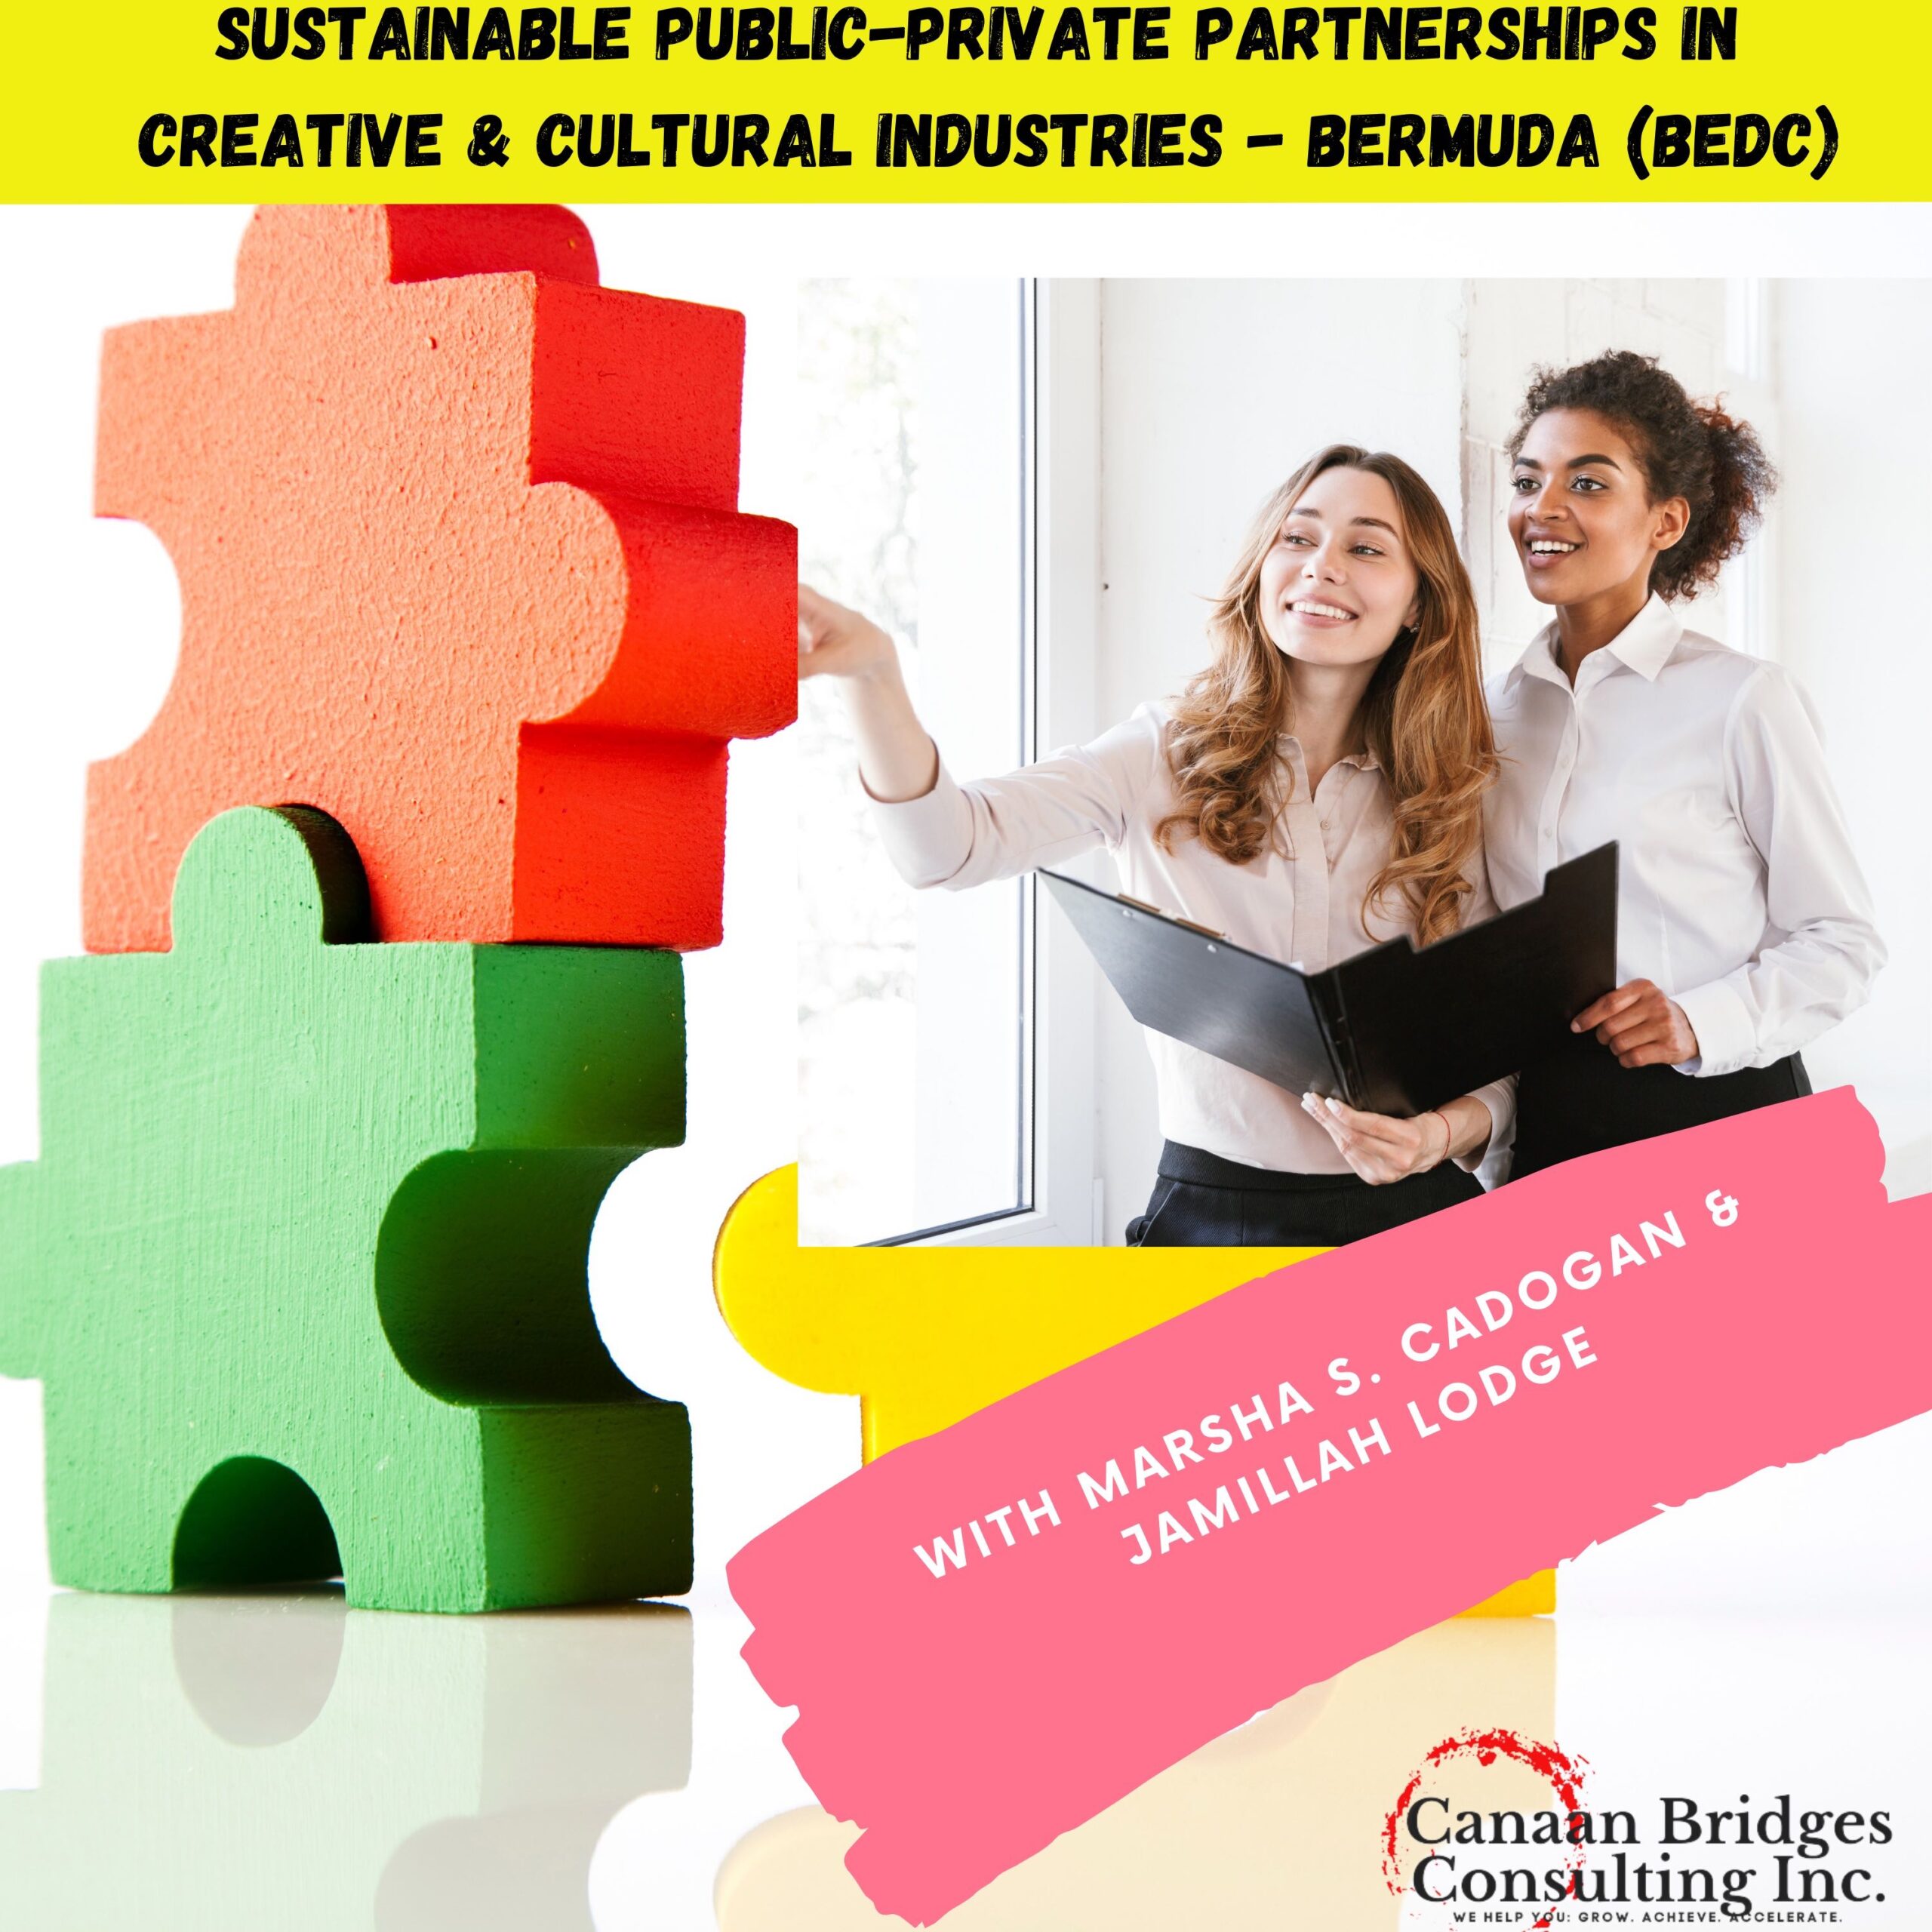 Sustainable Public-Private Partnerships in Creative & Cultural Industries (BEDC)